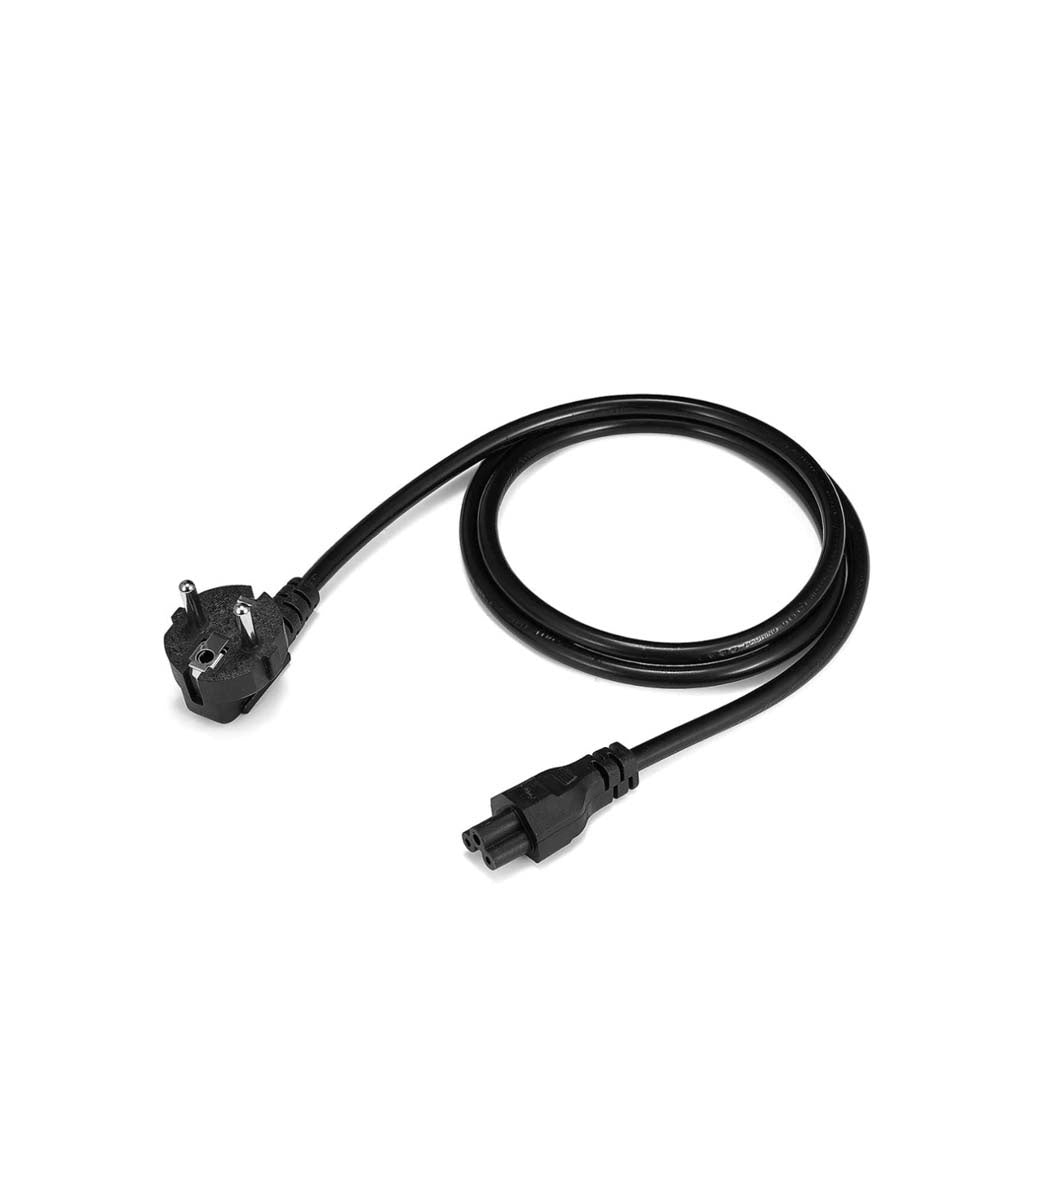 Segway Ninebot G30 Max Charger Cable